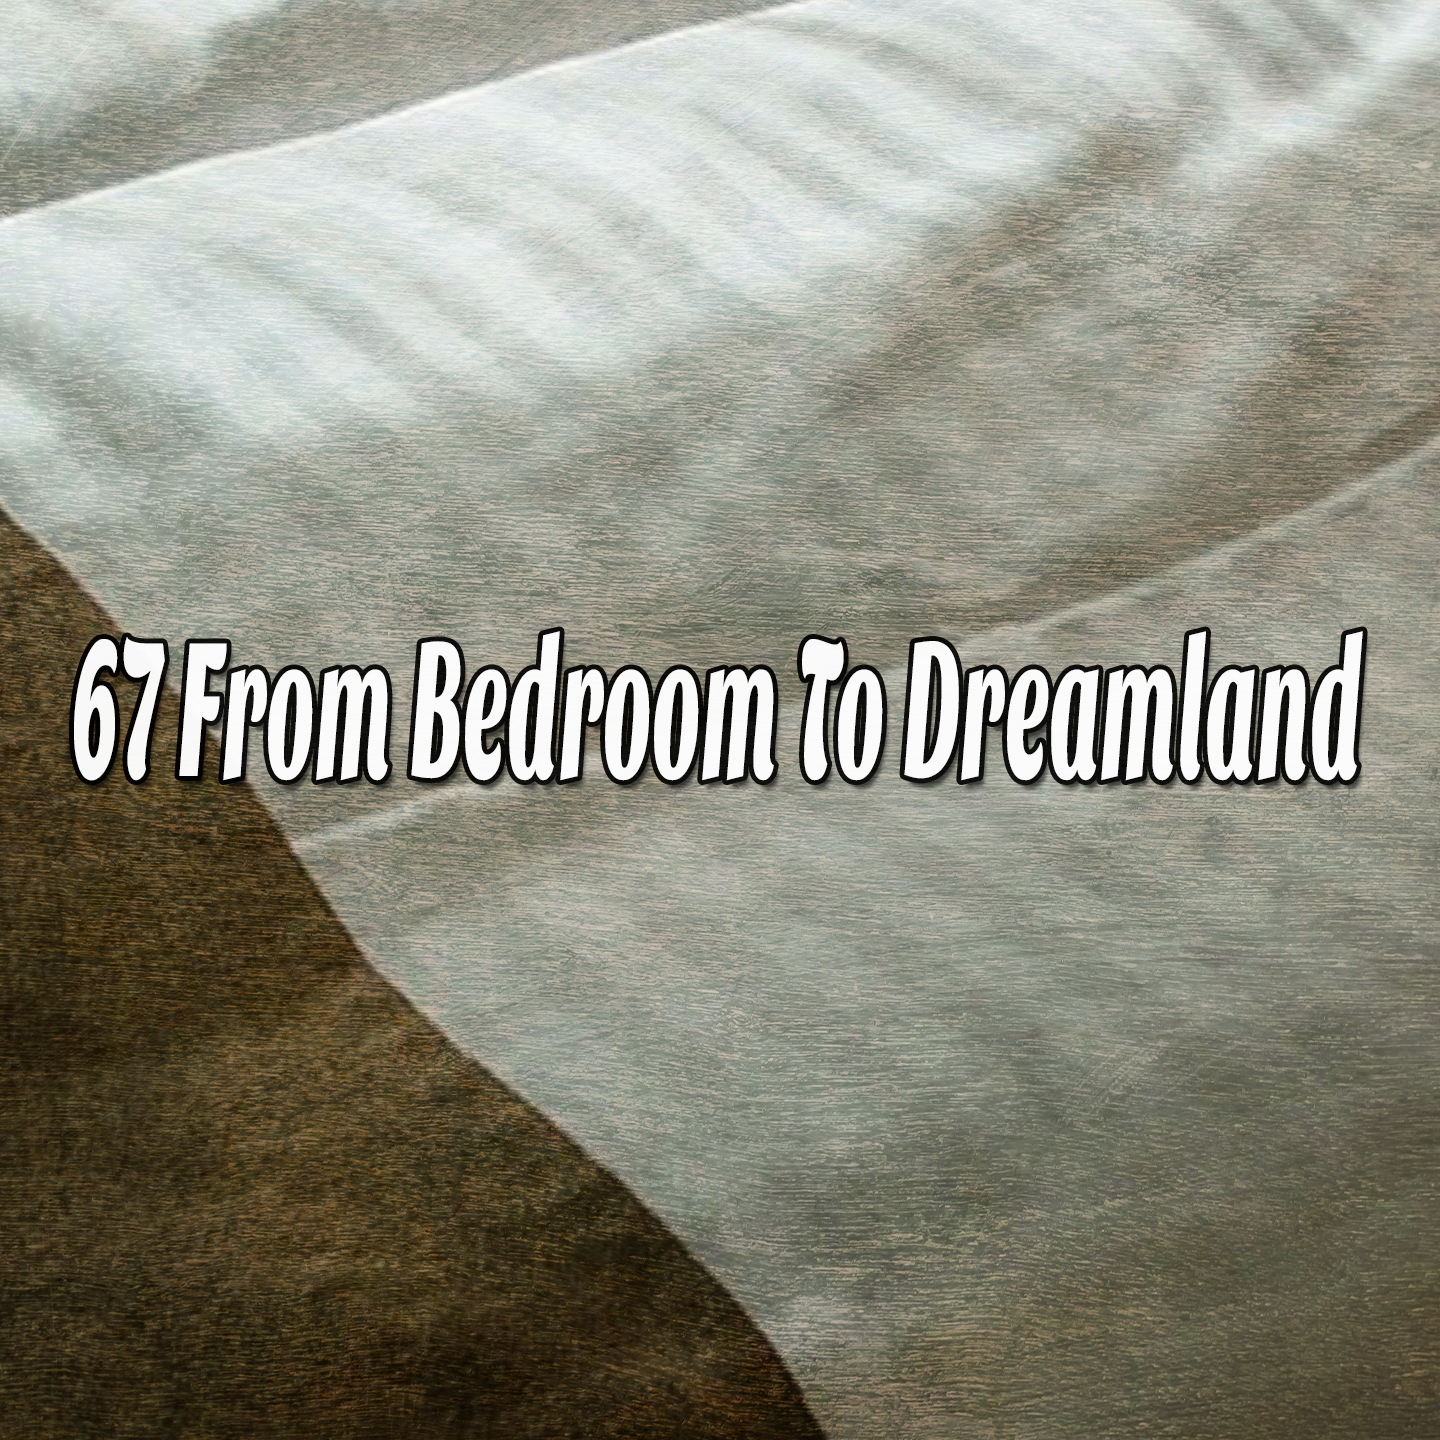 67 From Bedroom To Dreamland